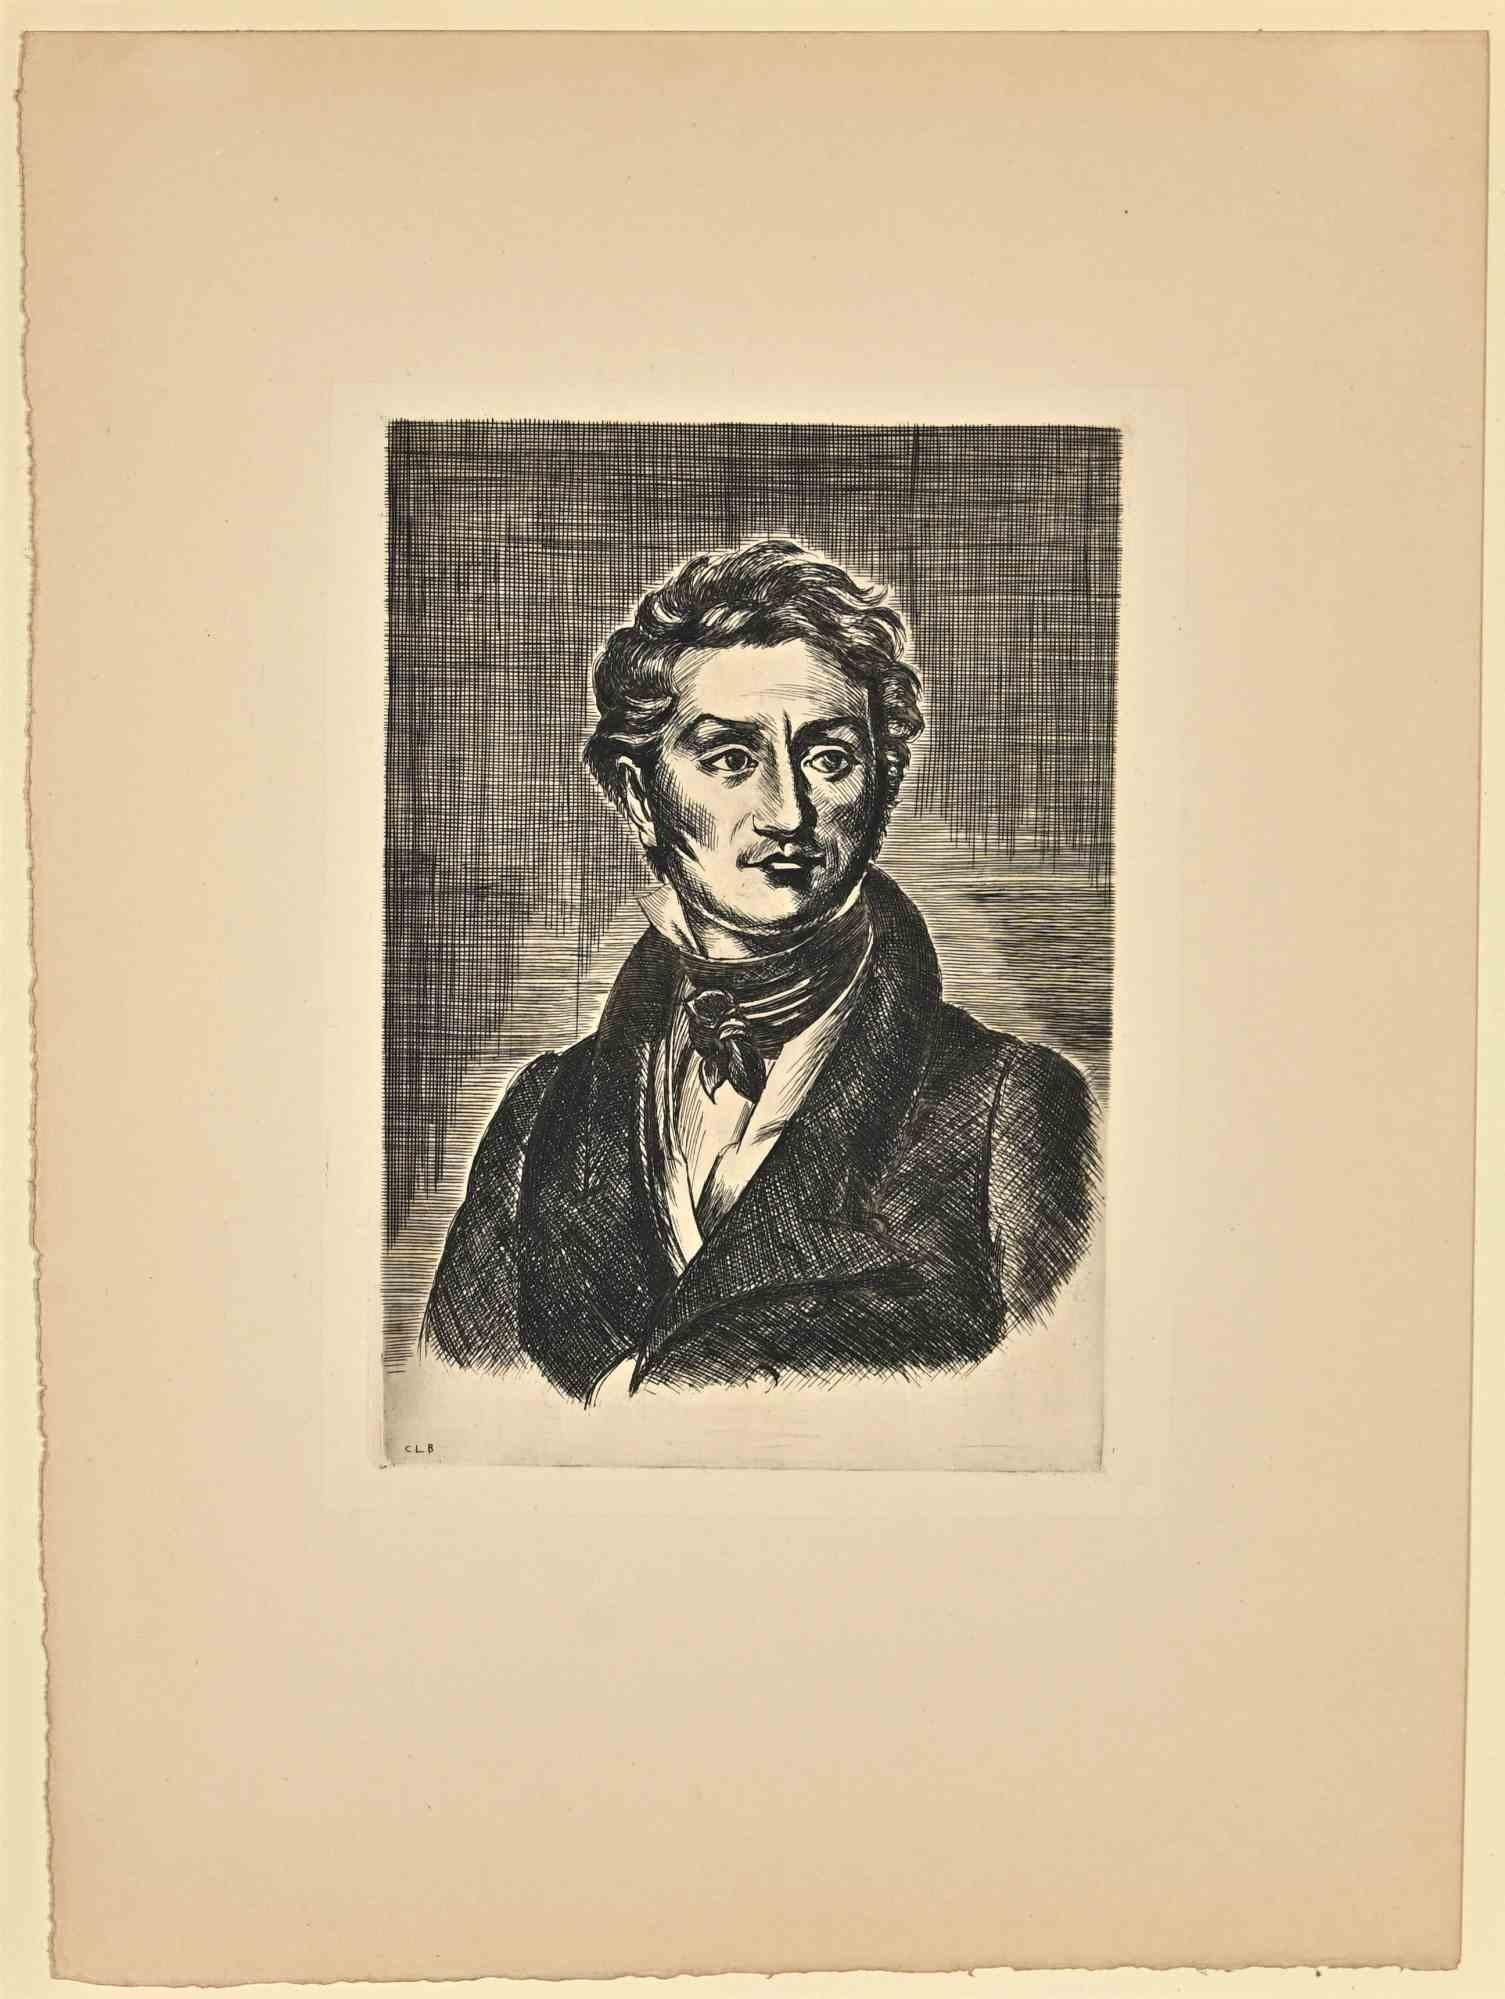 Portrait Of Charles Nodier is an Etching realized by Constant Le Breton in the early 20th Century.

Good conditions.

Monogrammed on plate.

The artwork is depicted through soft short strokes with mastery.